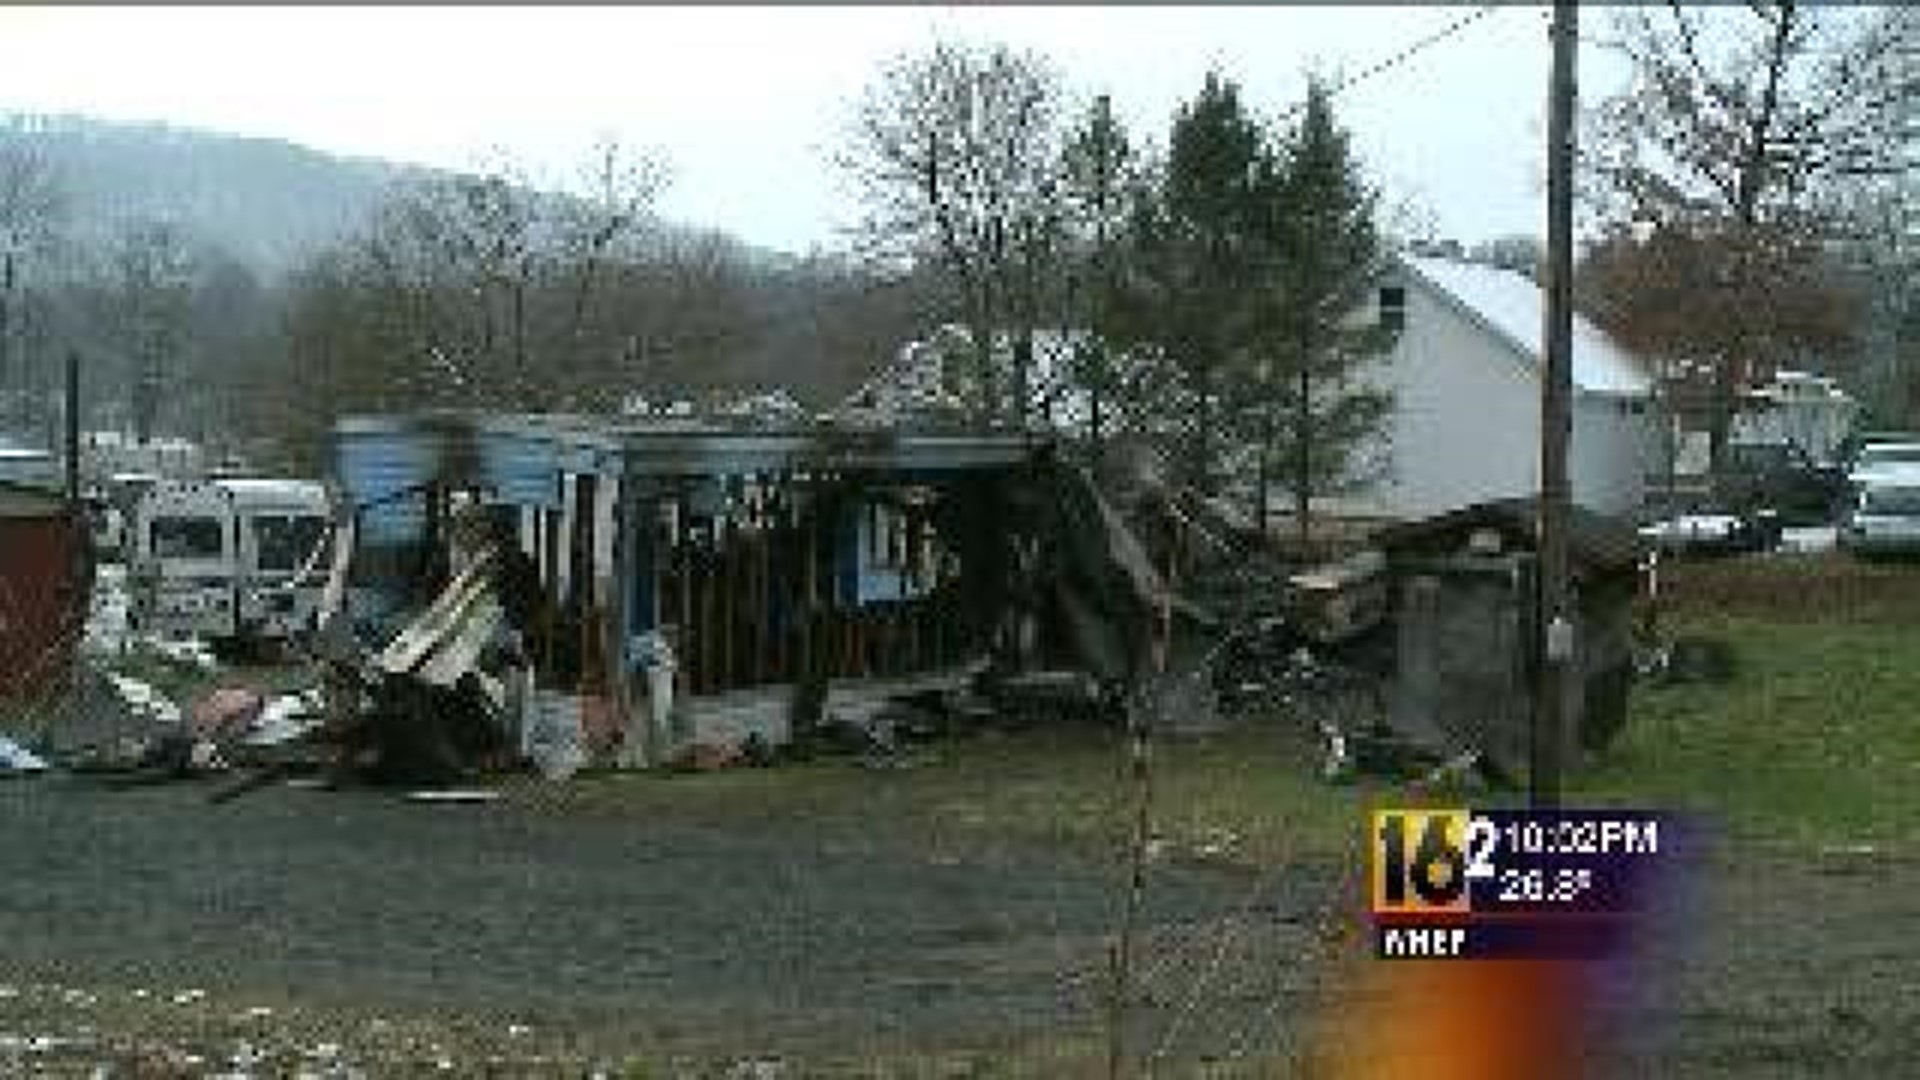 Fire Guts Mobile Home in Northumberland County